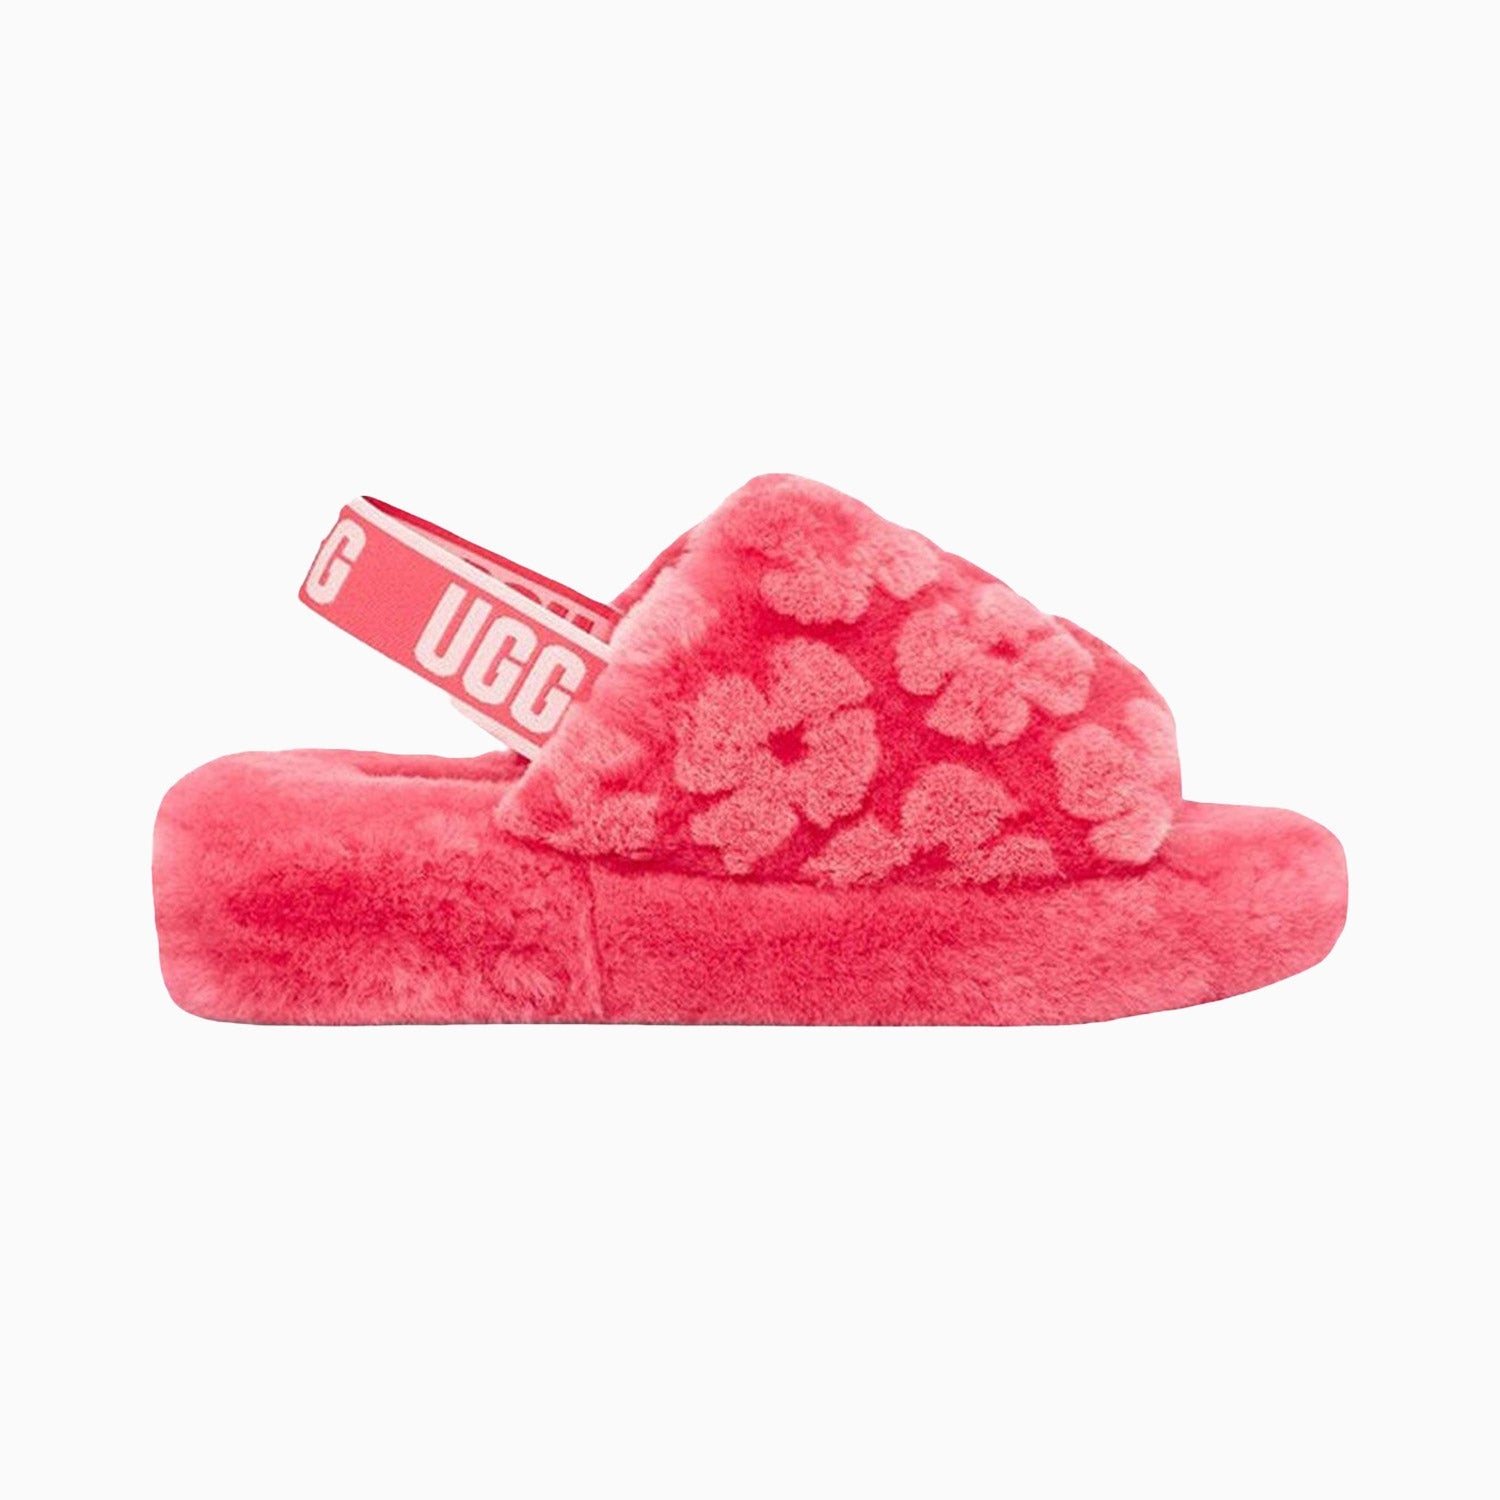 UGG Women's Fluff Yeah Slide Poppy - Color: Pink - Tops and Bottoms USA -